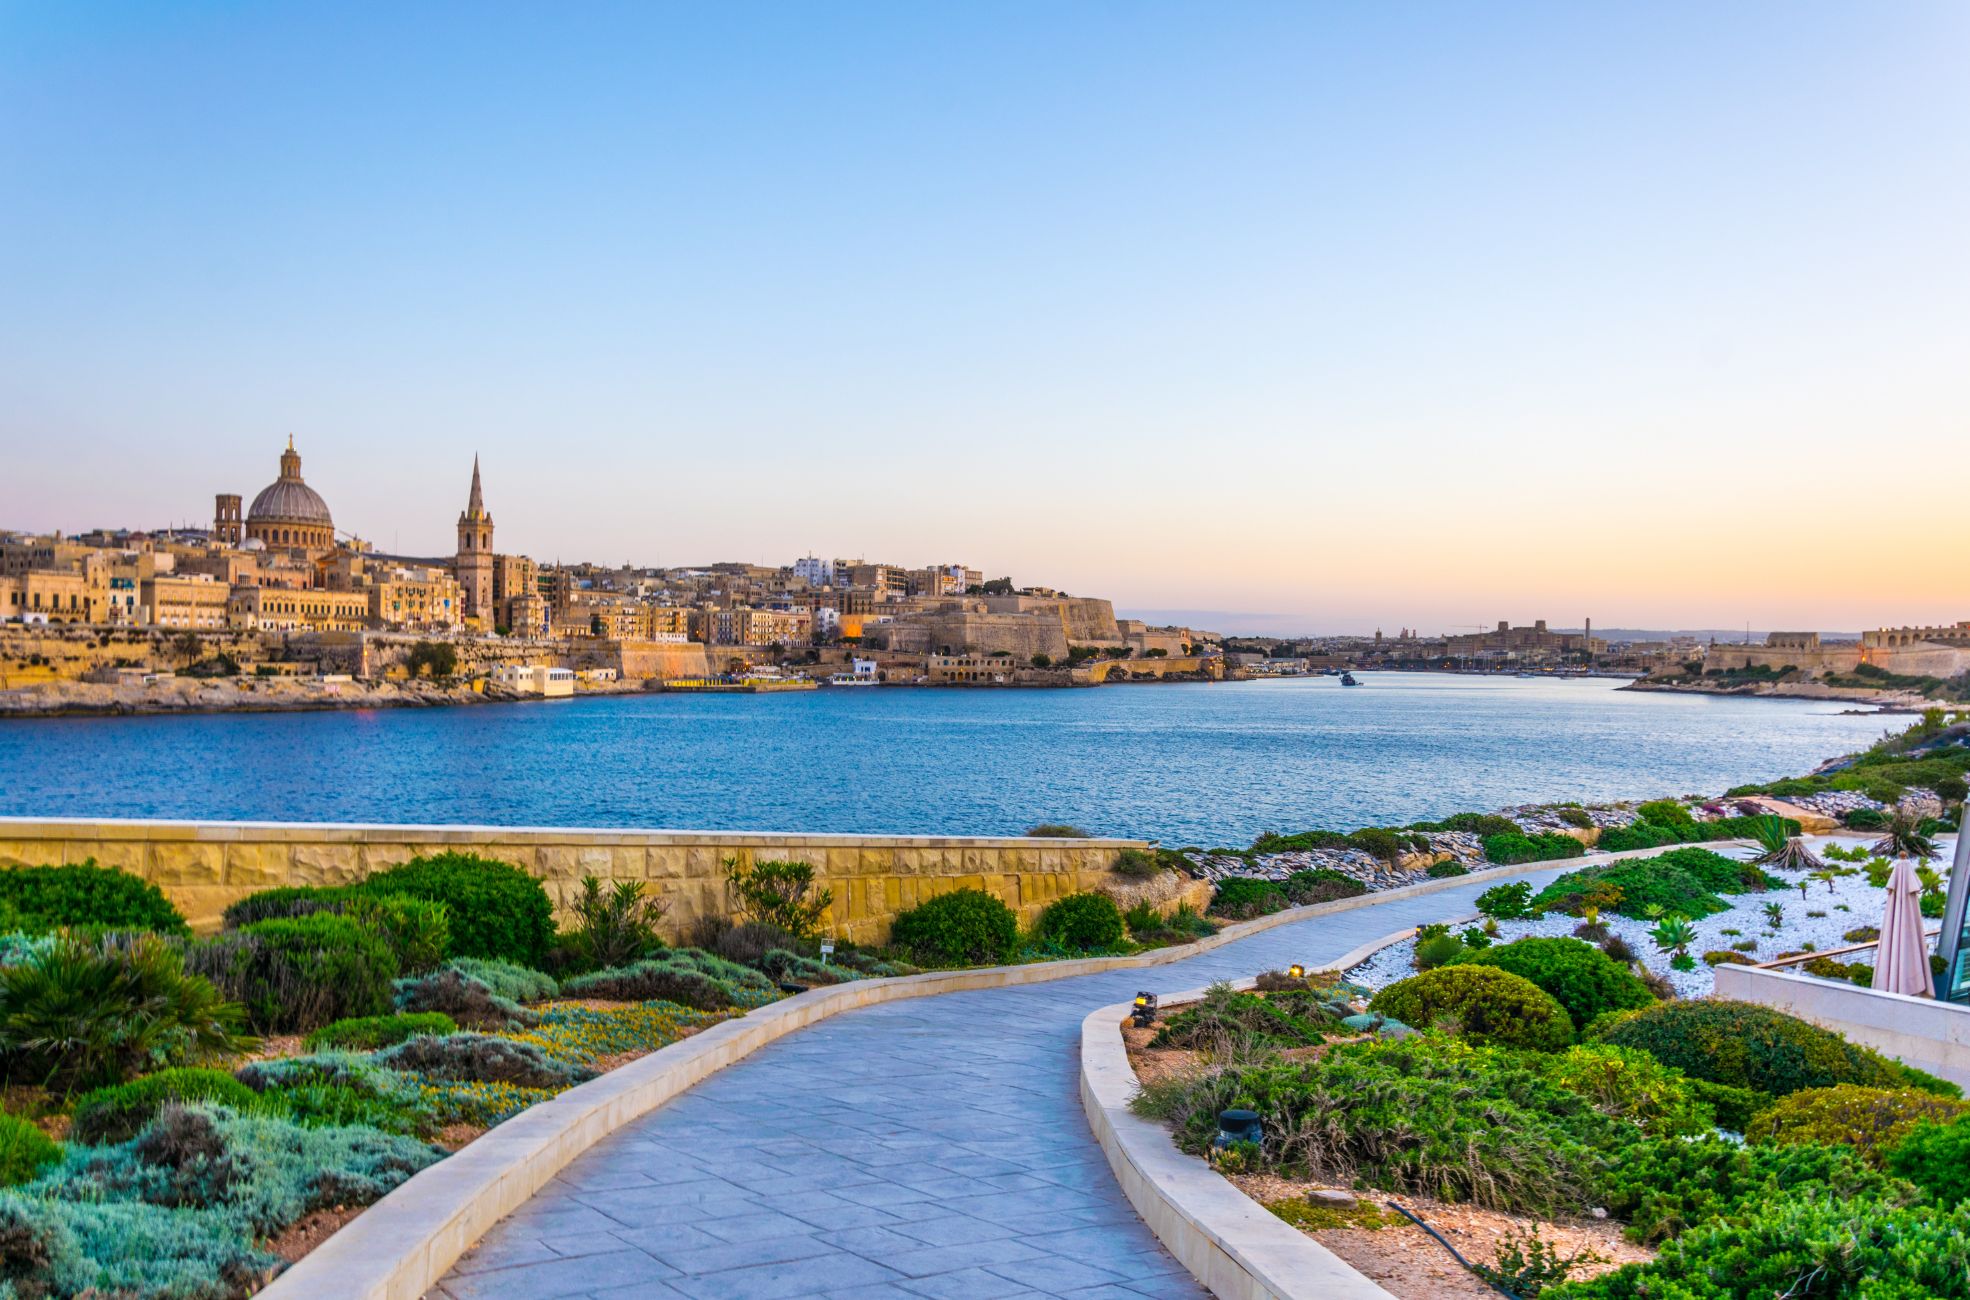 Pathway, Buildings And River In Malta